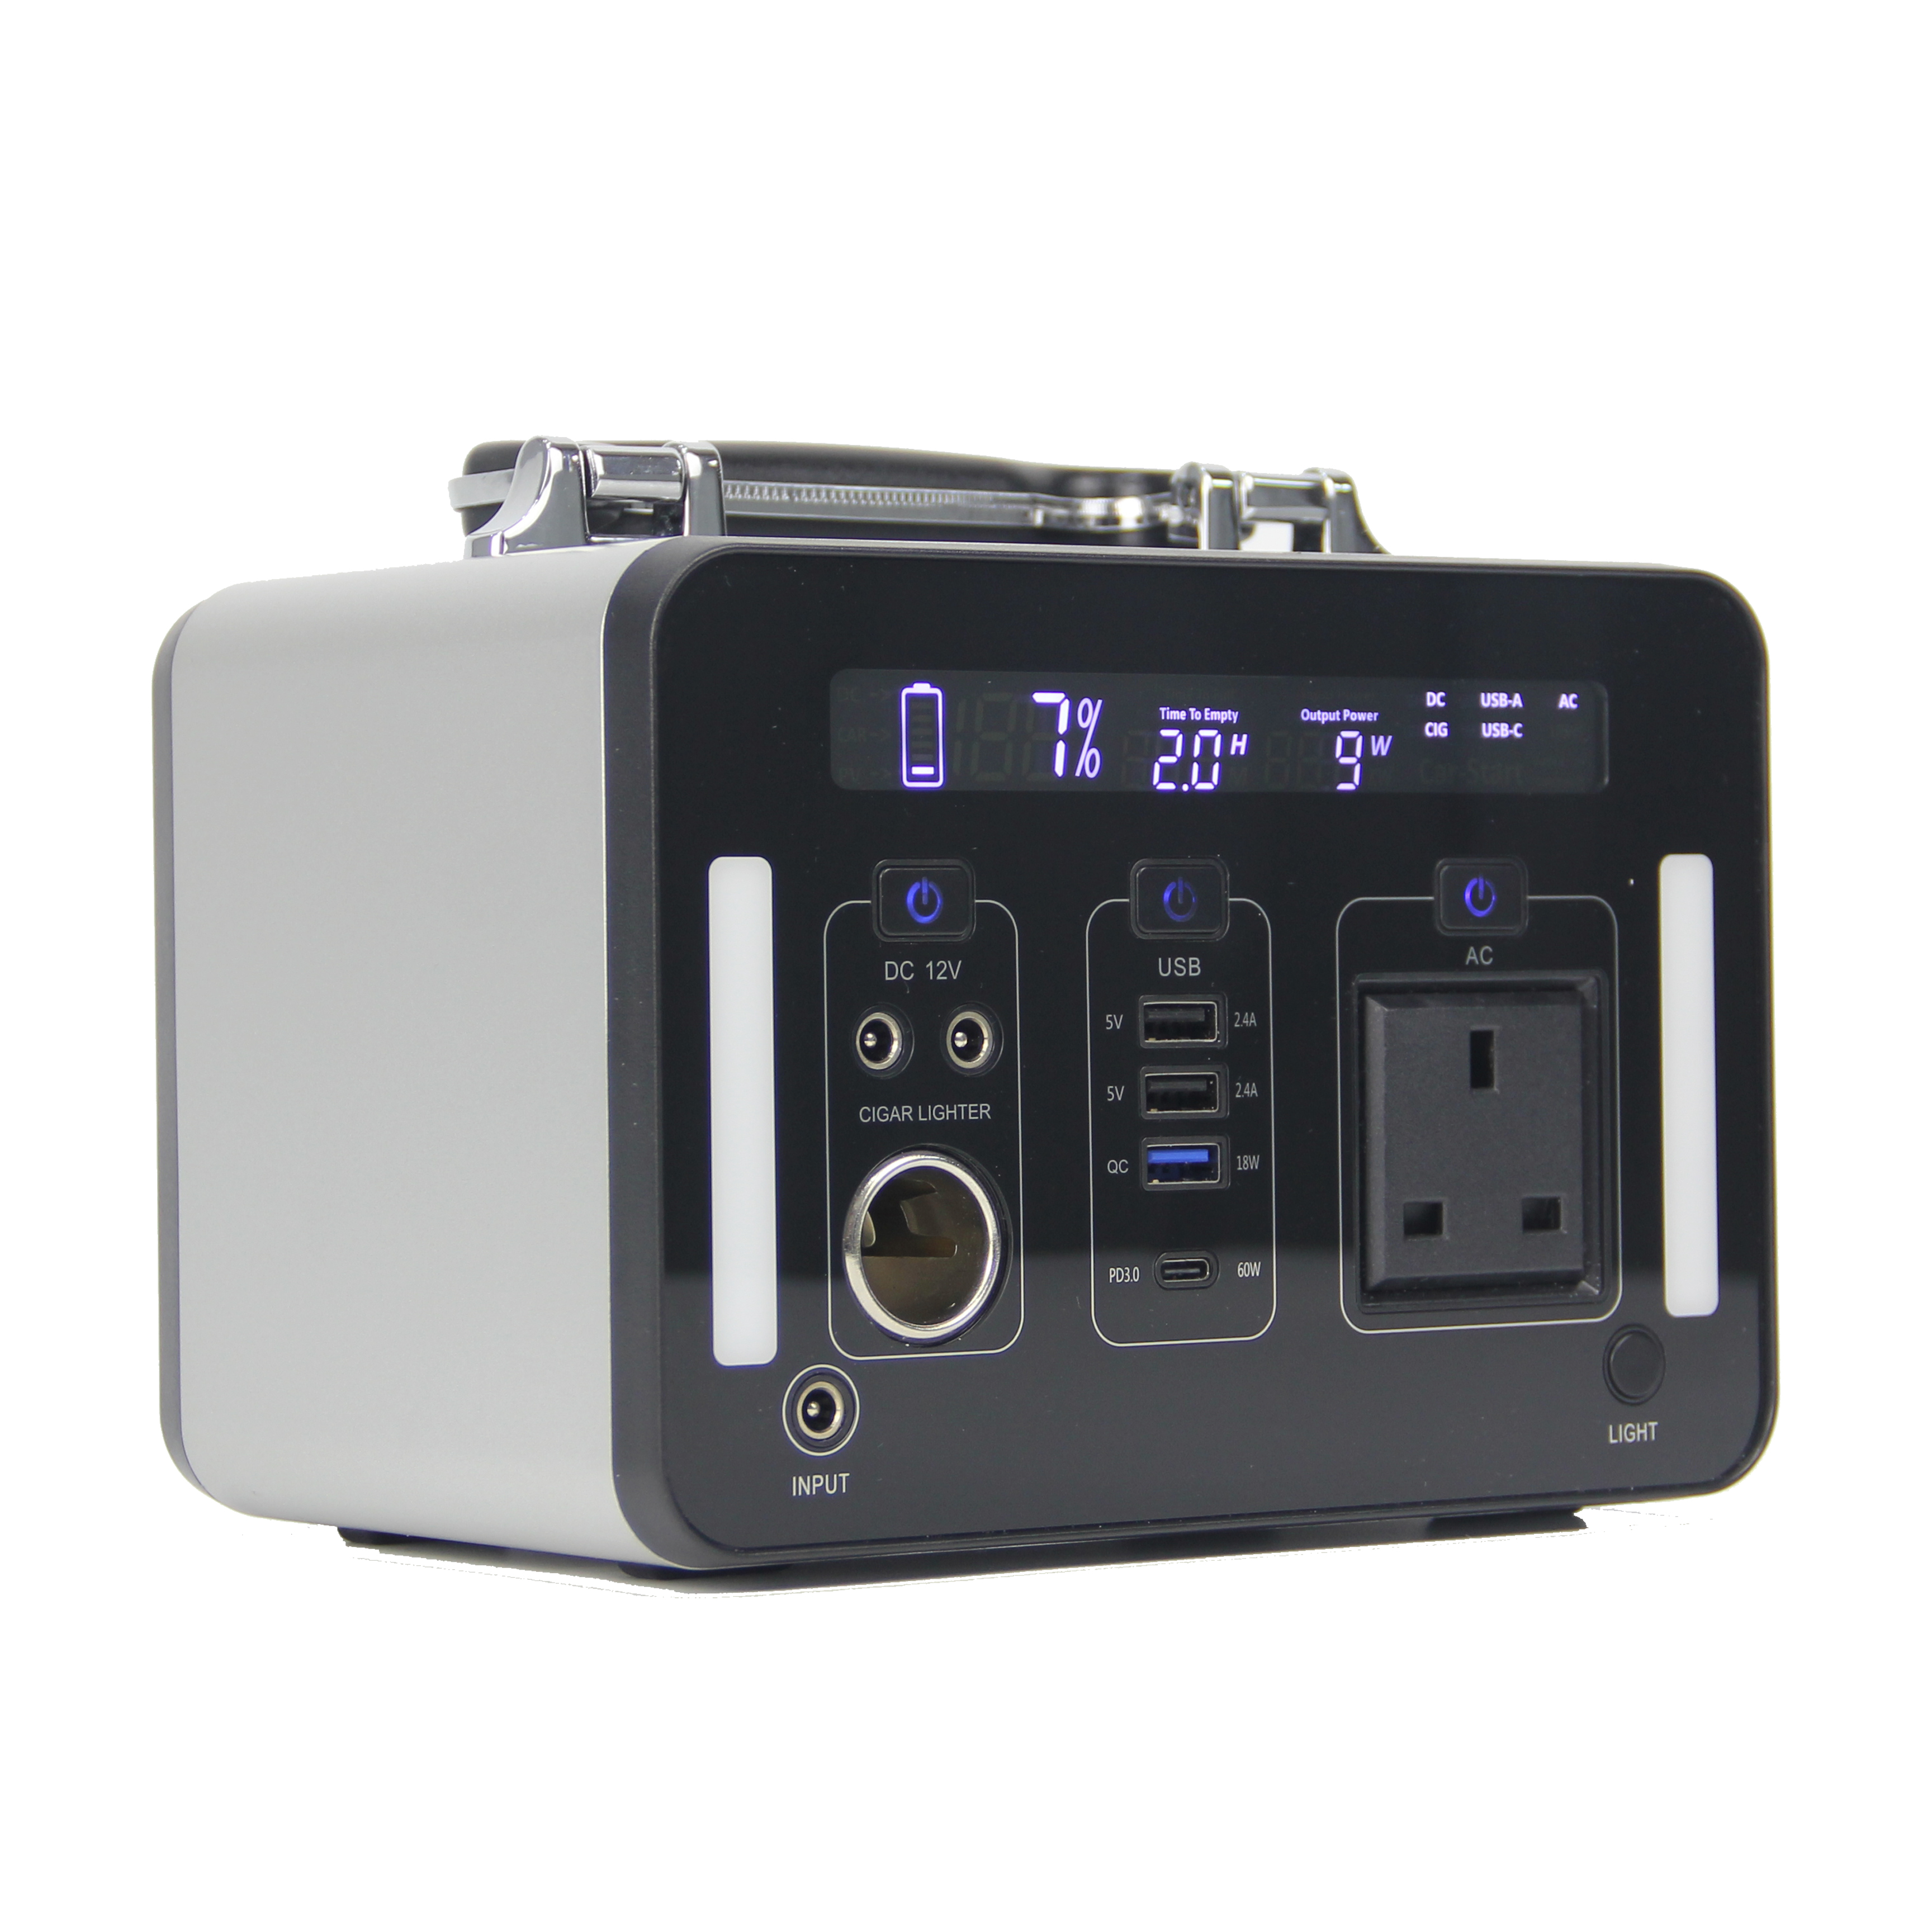 500w 110v with Battery Ports Portable Backup Station for Sale